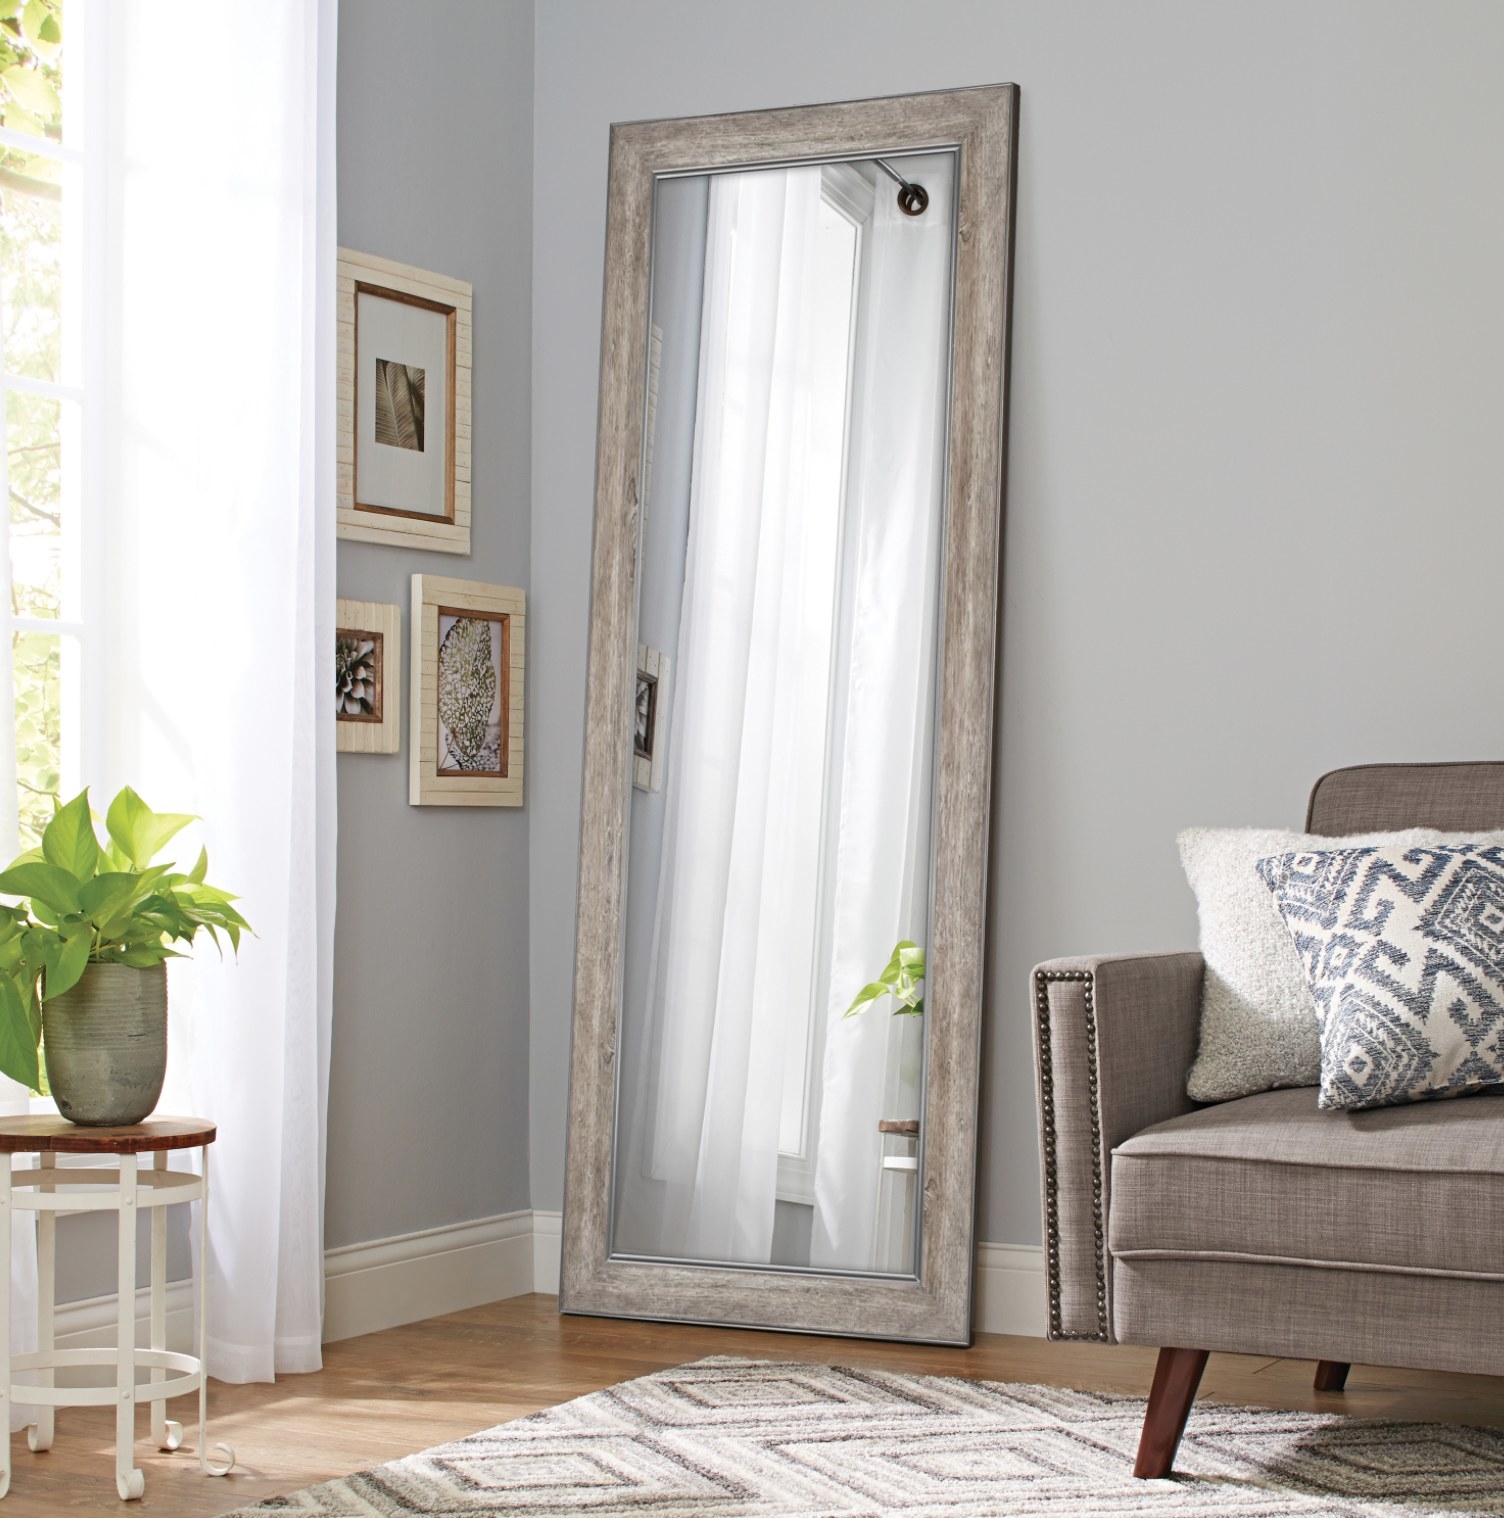 The mirror in gray rustic